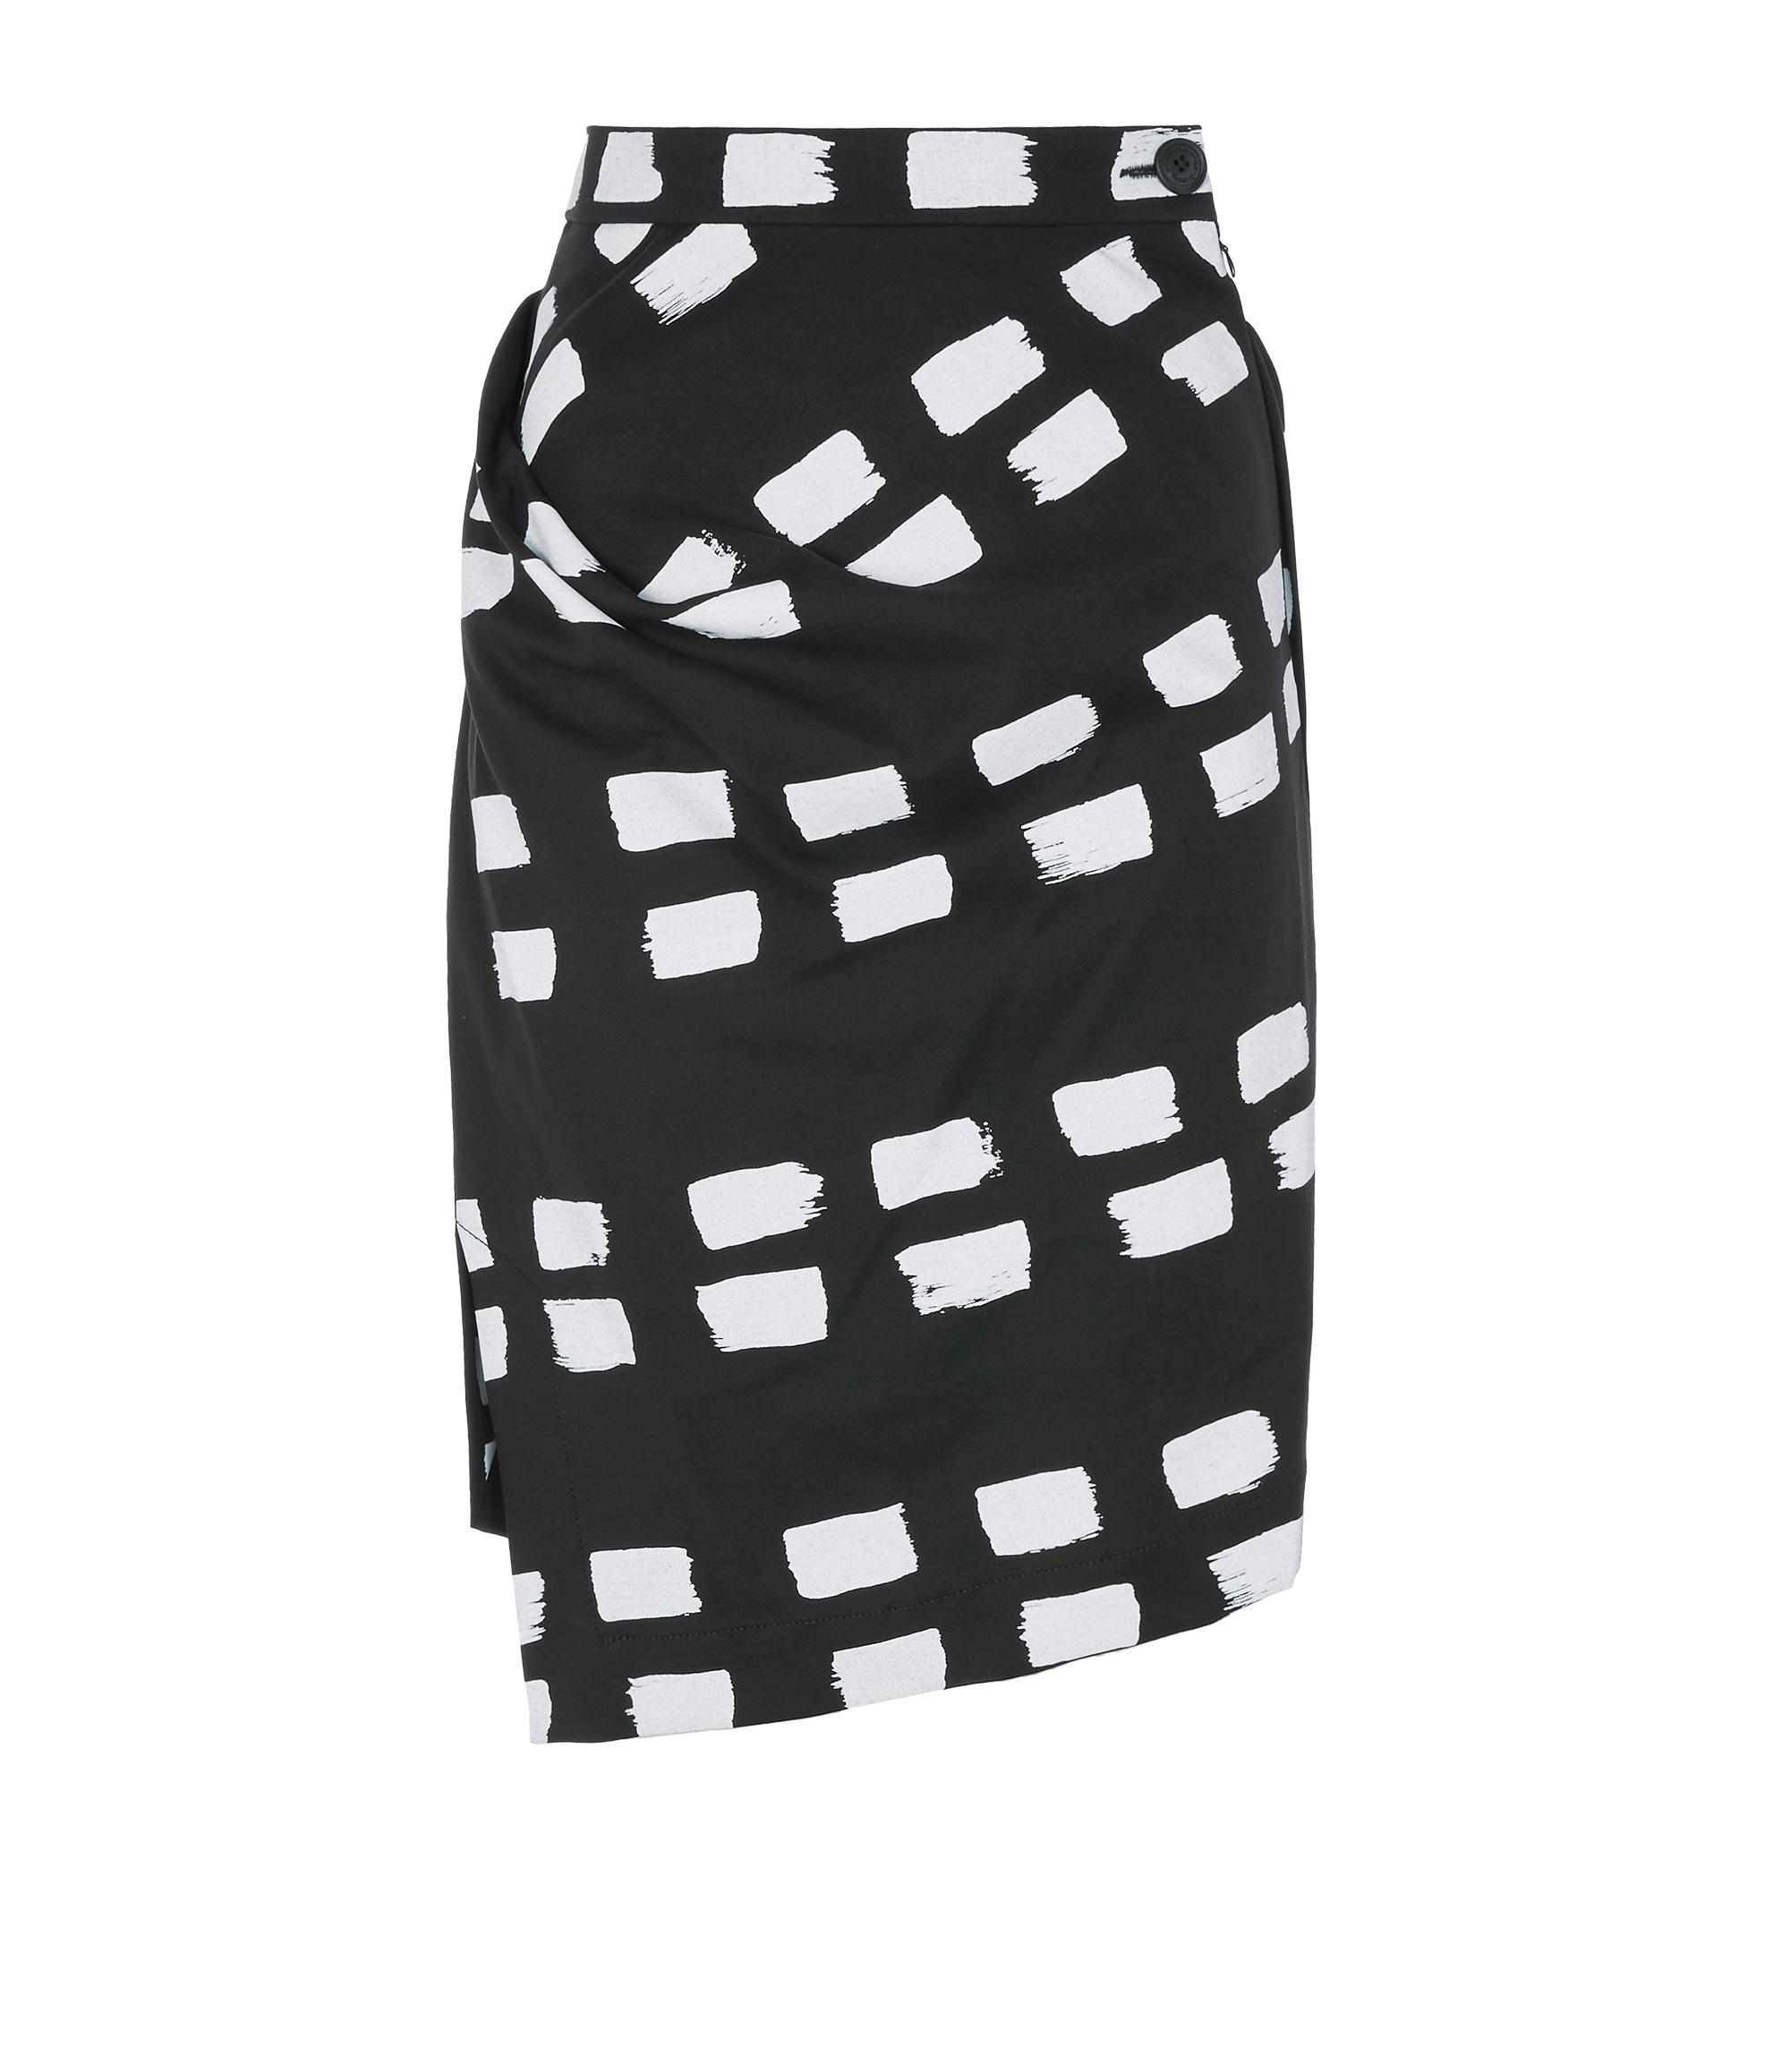 Vivienne Westwood Accident Skirt Black With Dashes | ModeSens